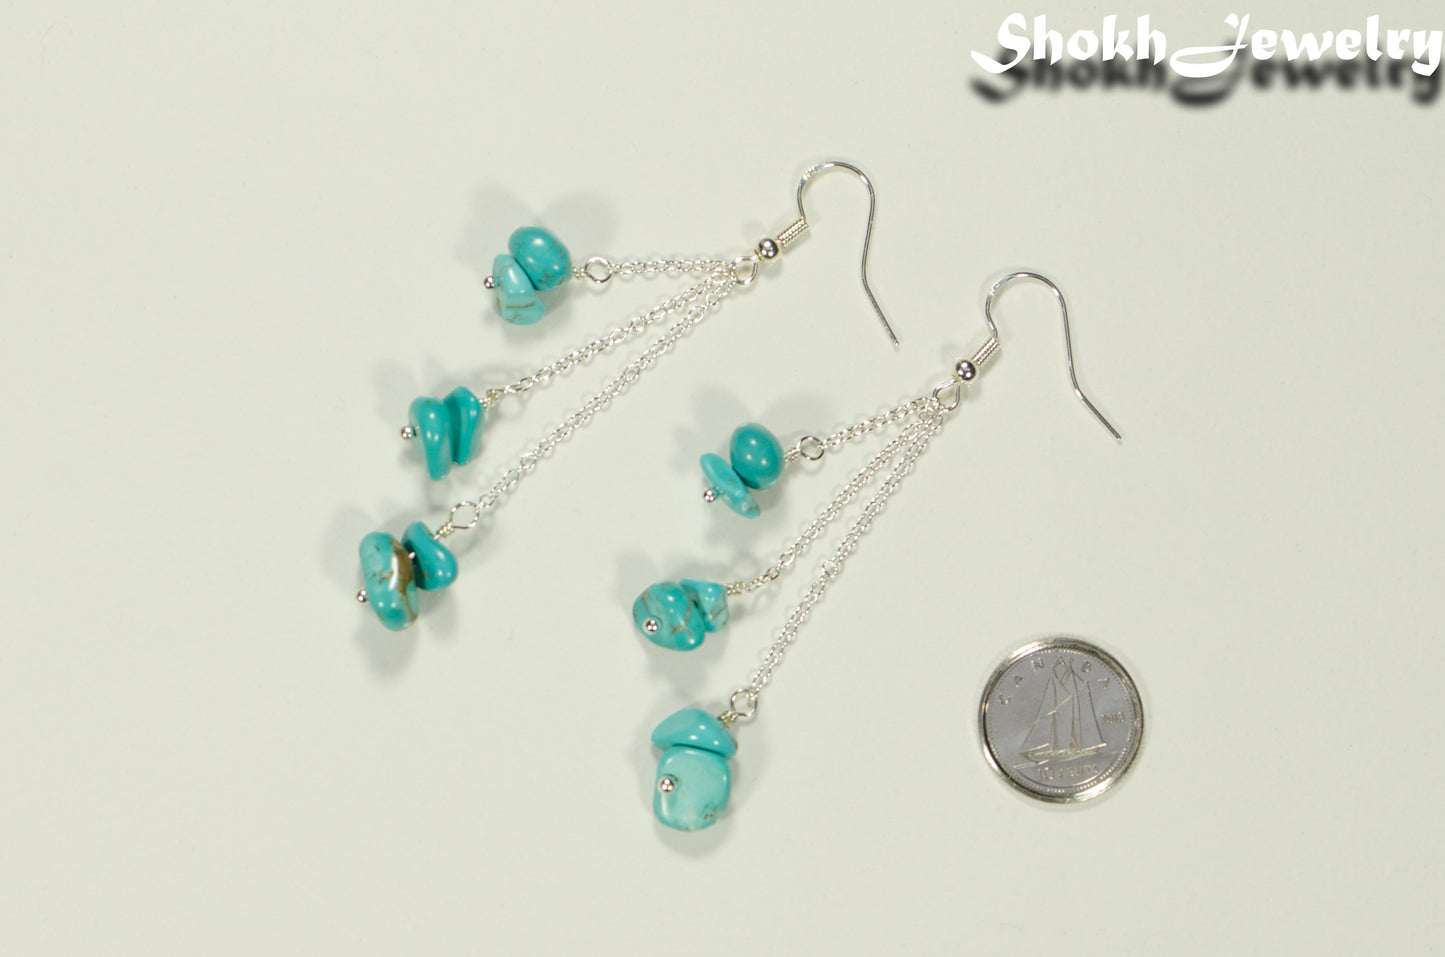 Long Silver Plated Chain and Turquoise Crystal Chip Earrings beside a dime.